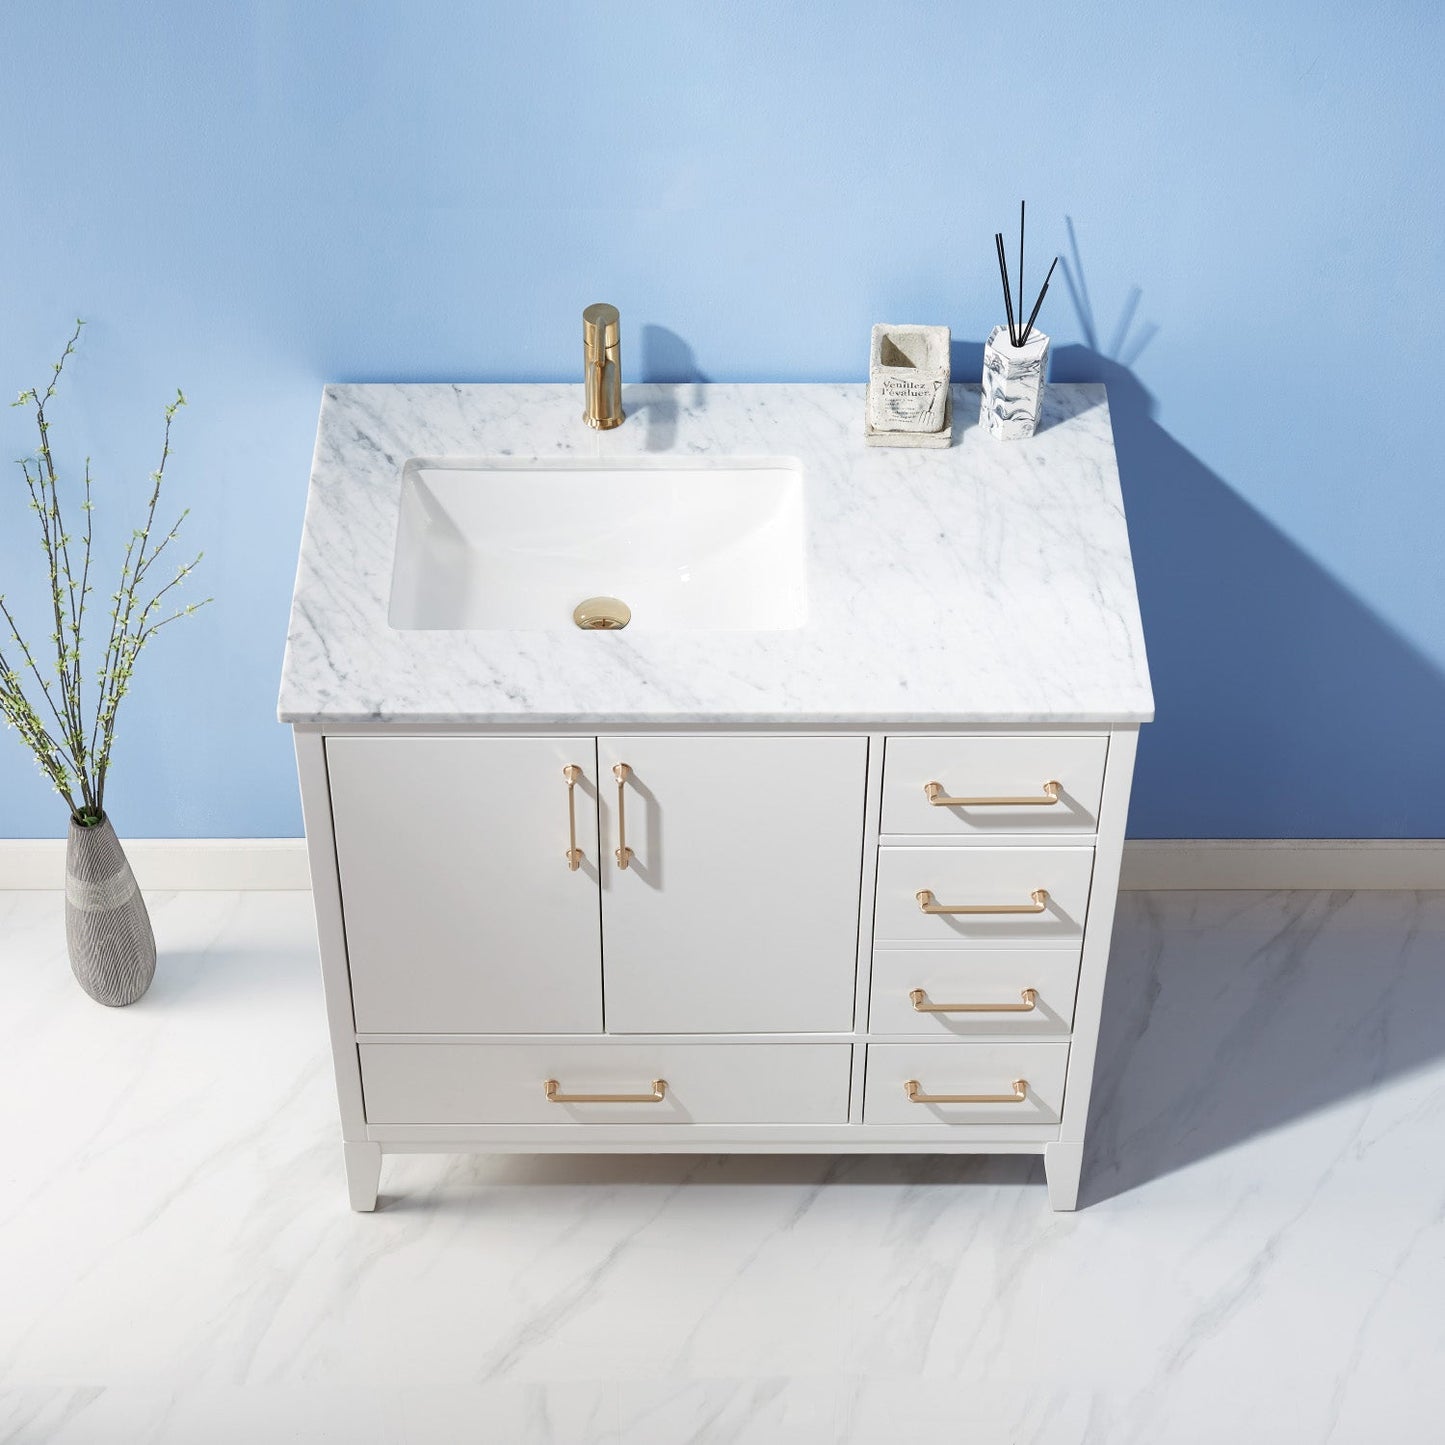 Sutton 36" Single Bathroom Vanity Set in White and Carrara White Marble Countertop without Mirror